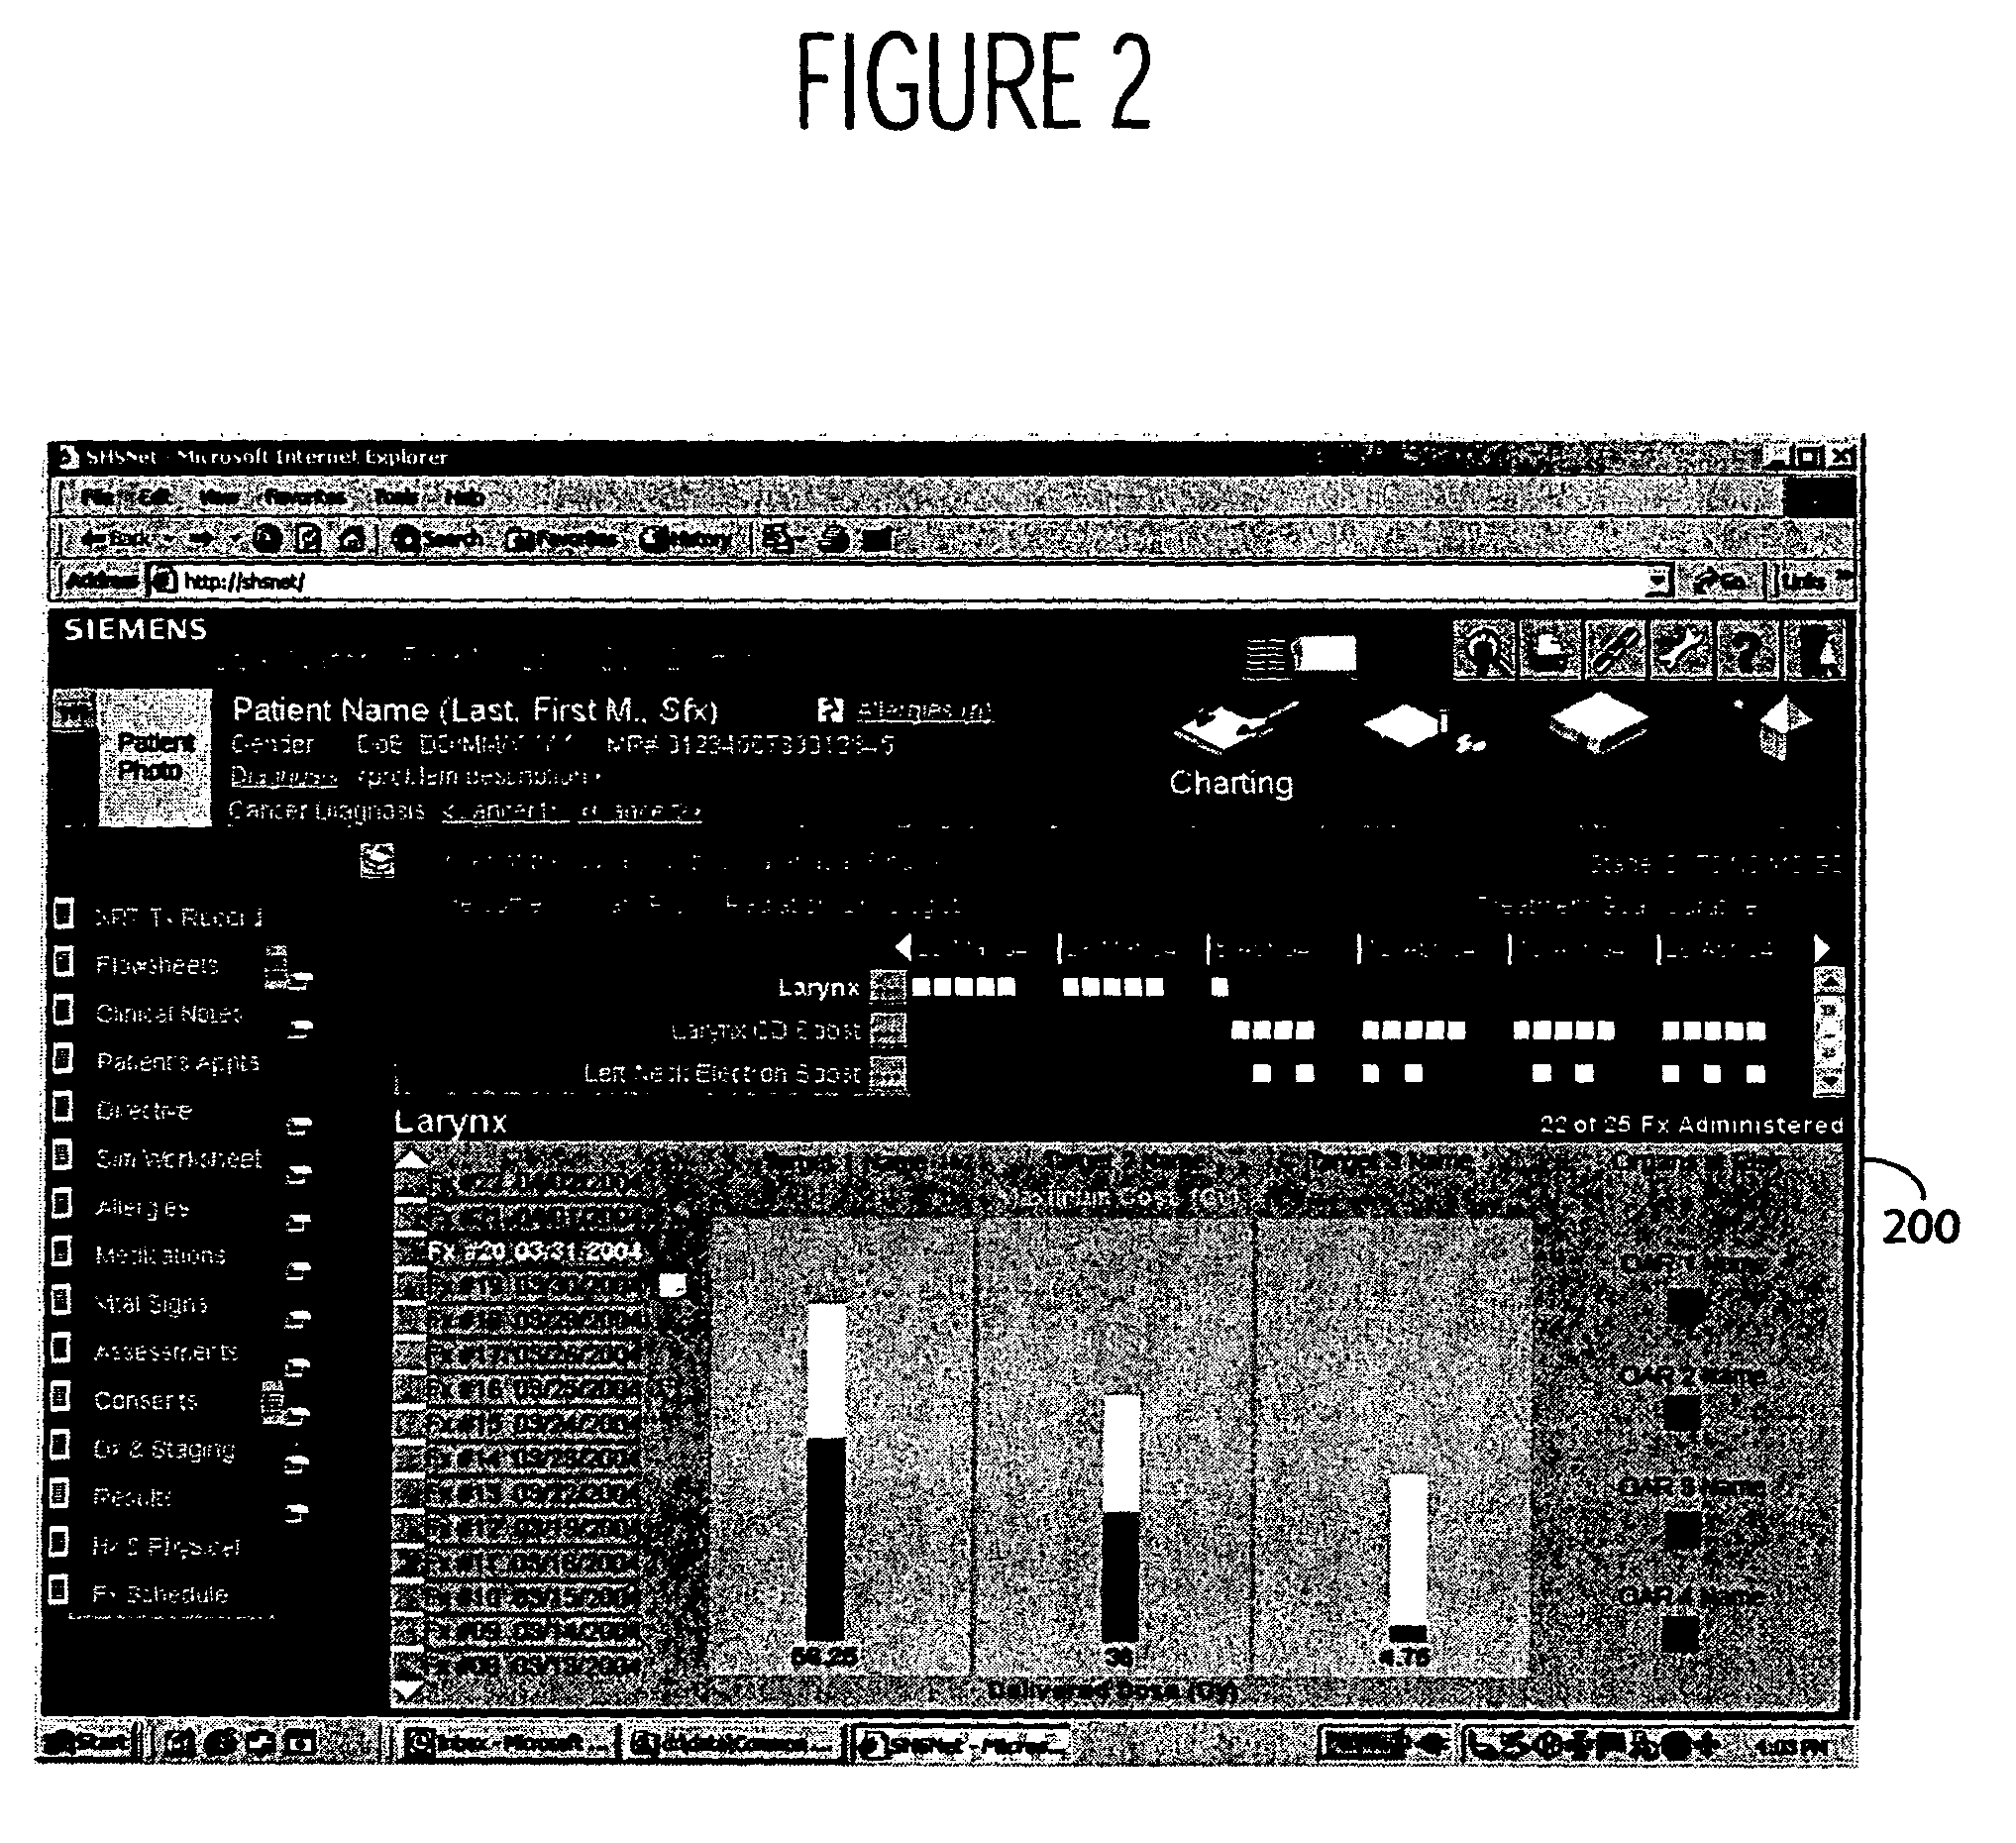 System and user interface for presenting treatment information